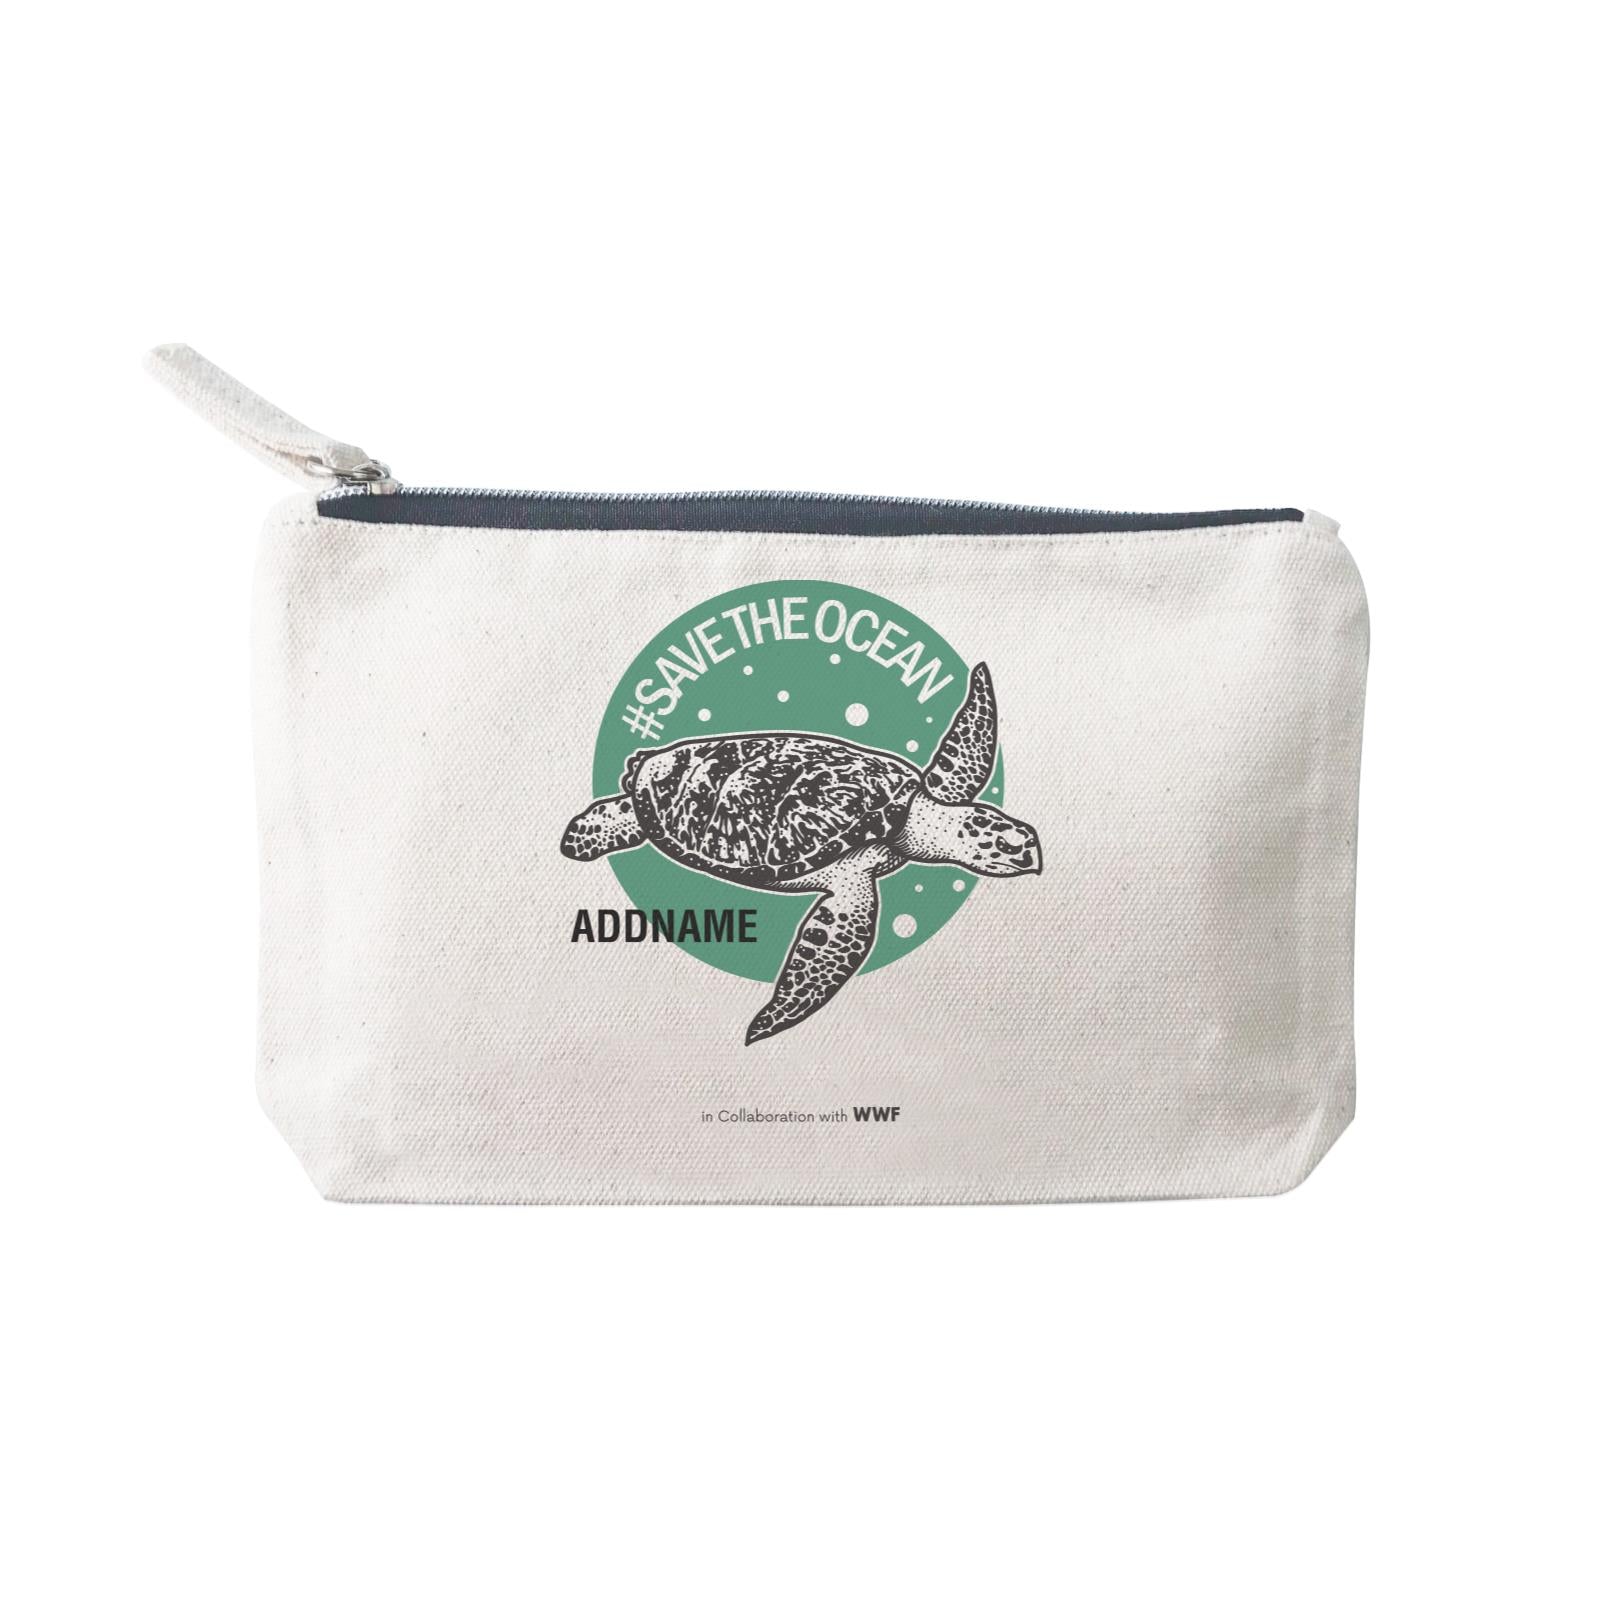 Hashtag Save the Ocean with Turtle Addname Mini Accessories Stationery Pouch 2